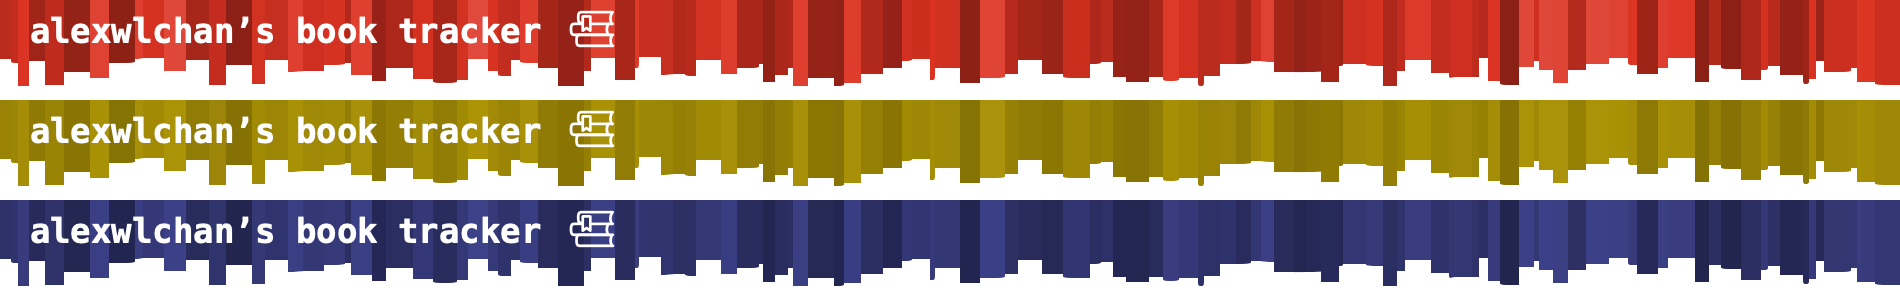 Three page headers in red, yellow, and blue. Each header is a collection of rectangles of different widths and heights in varying shades of red/yellow/blue, arranged so the top edge of the rectangles forms a straight line.